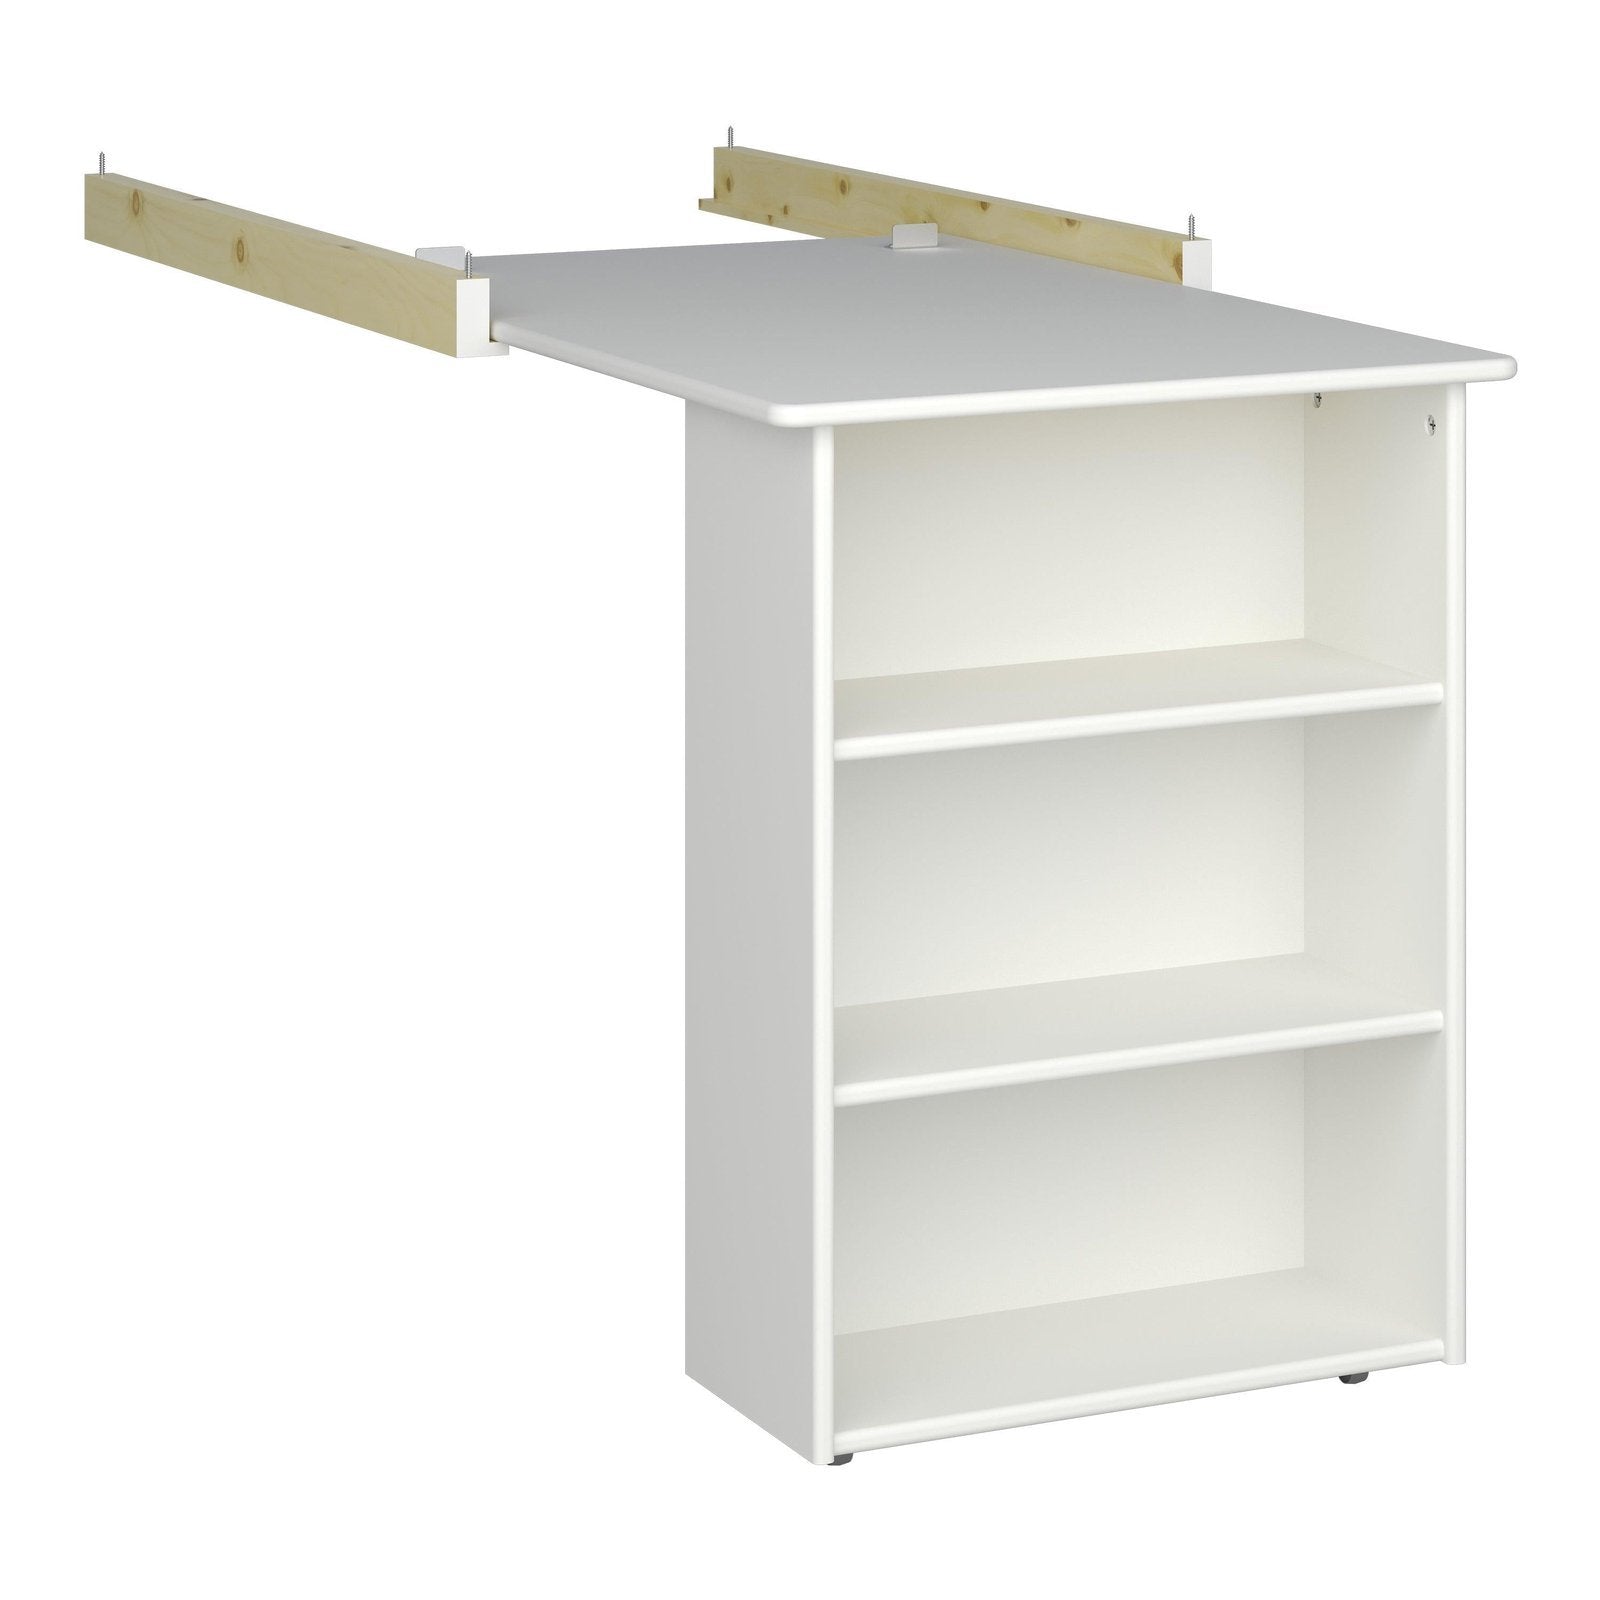 Steens for Kids Pull Out Desk - White for use with Steens Mid-Sleeper Beds